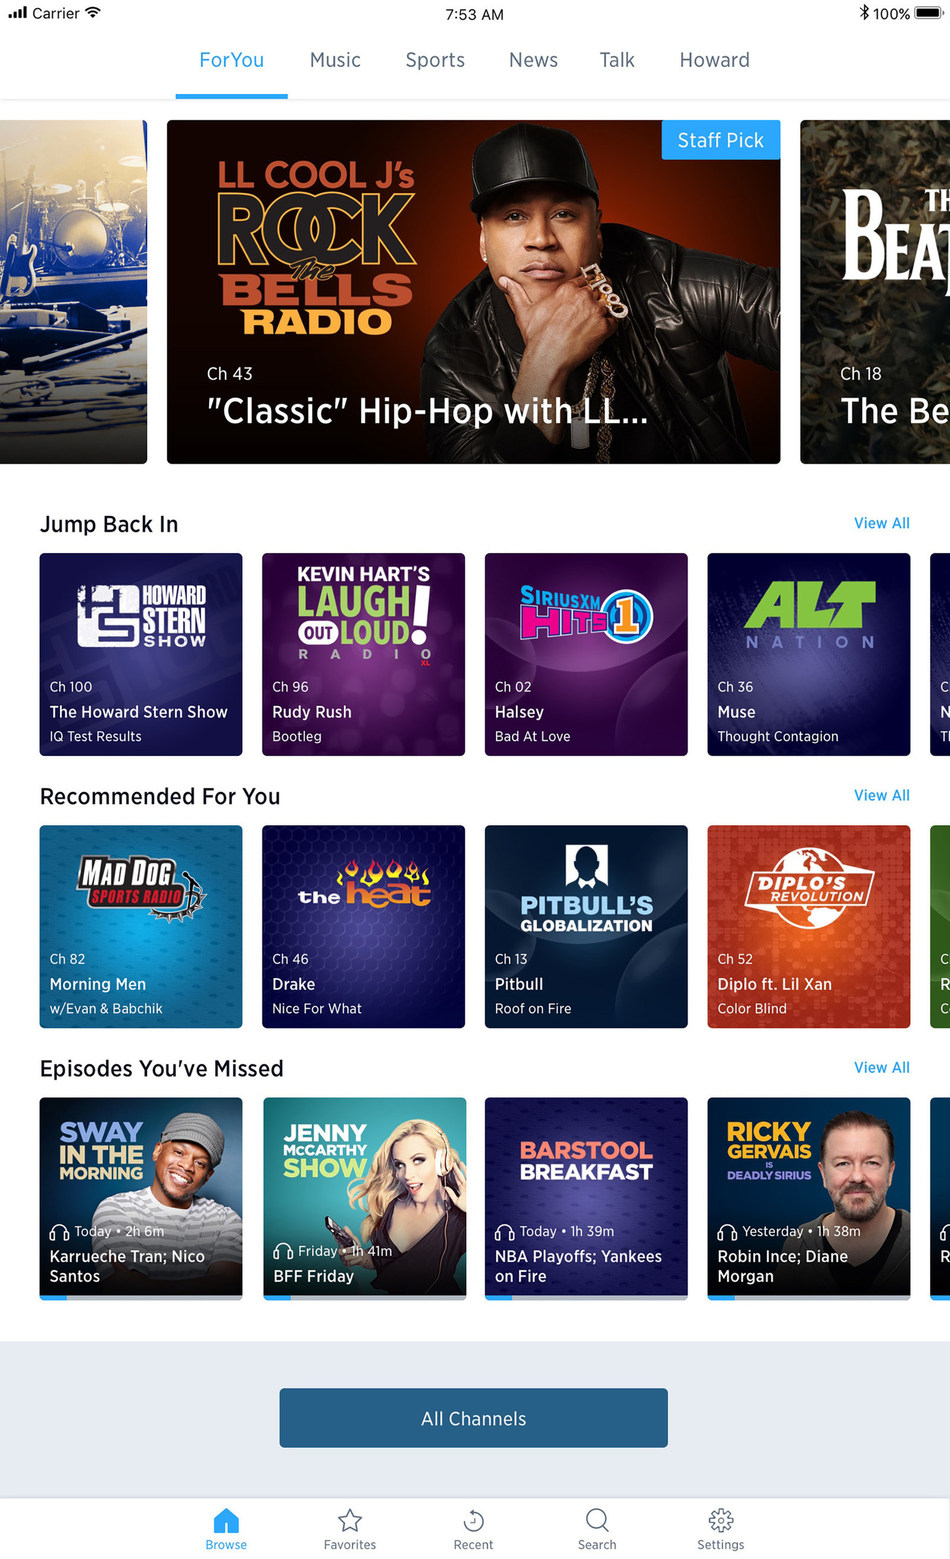 SiriusXM giving 2 week free preview of its world of content starting today